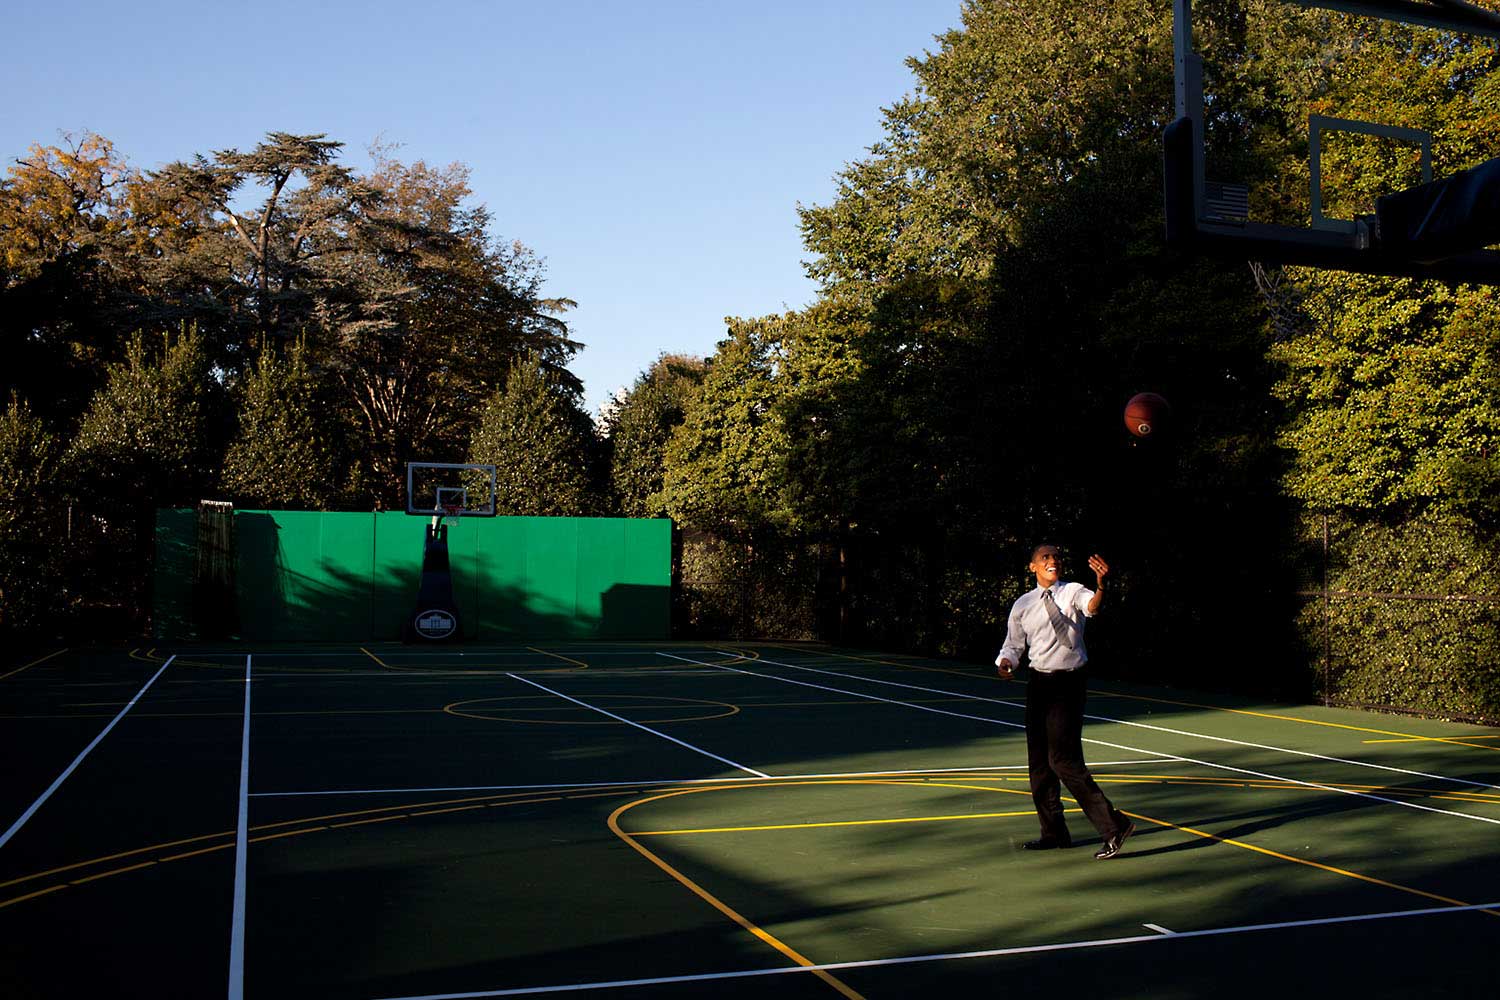 "After a day filled with meetings, the President headed to the White House basketball court to shoot a few baskets with his personal aide Reggie Love, Oct. 13, 2010. Before heading back to the Oval, he flipped the ball towards the rim just where the afternoon light was falling."